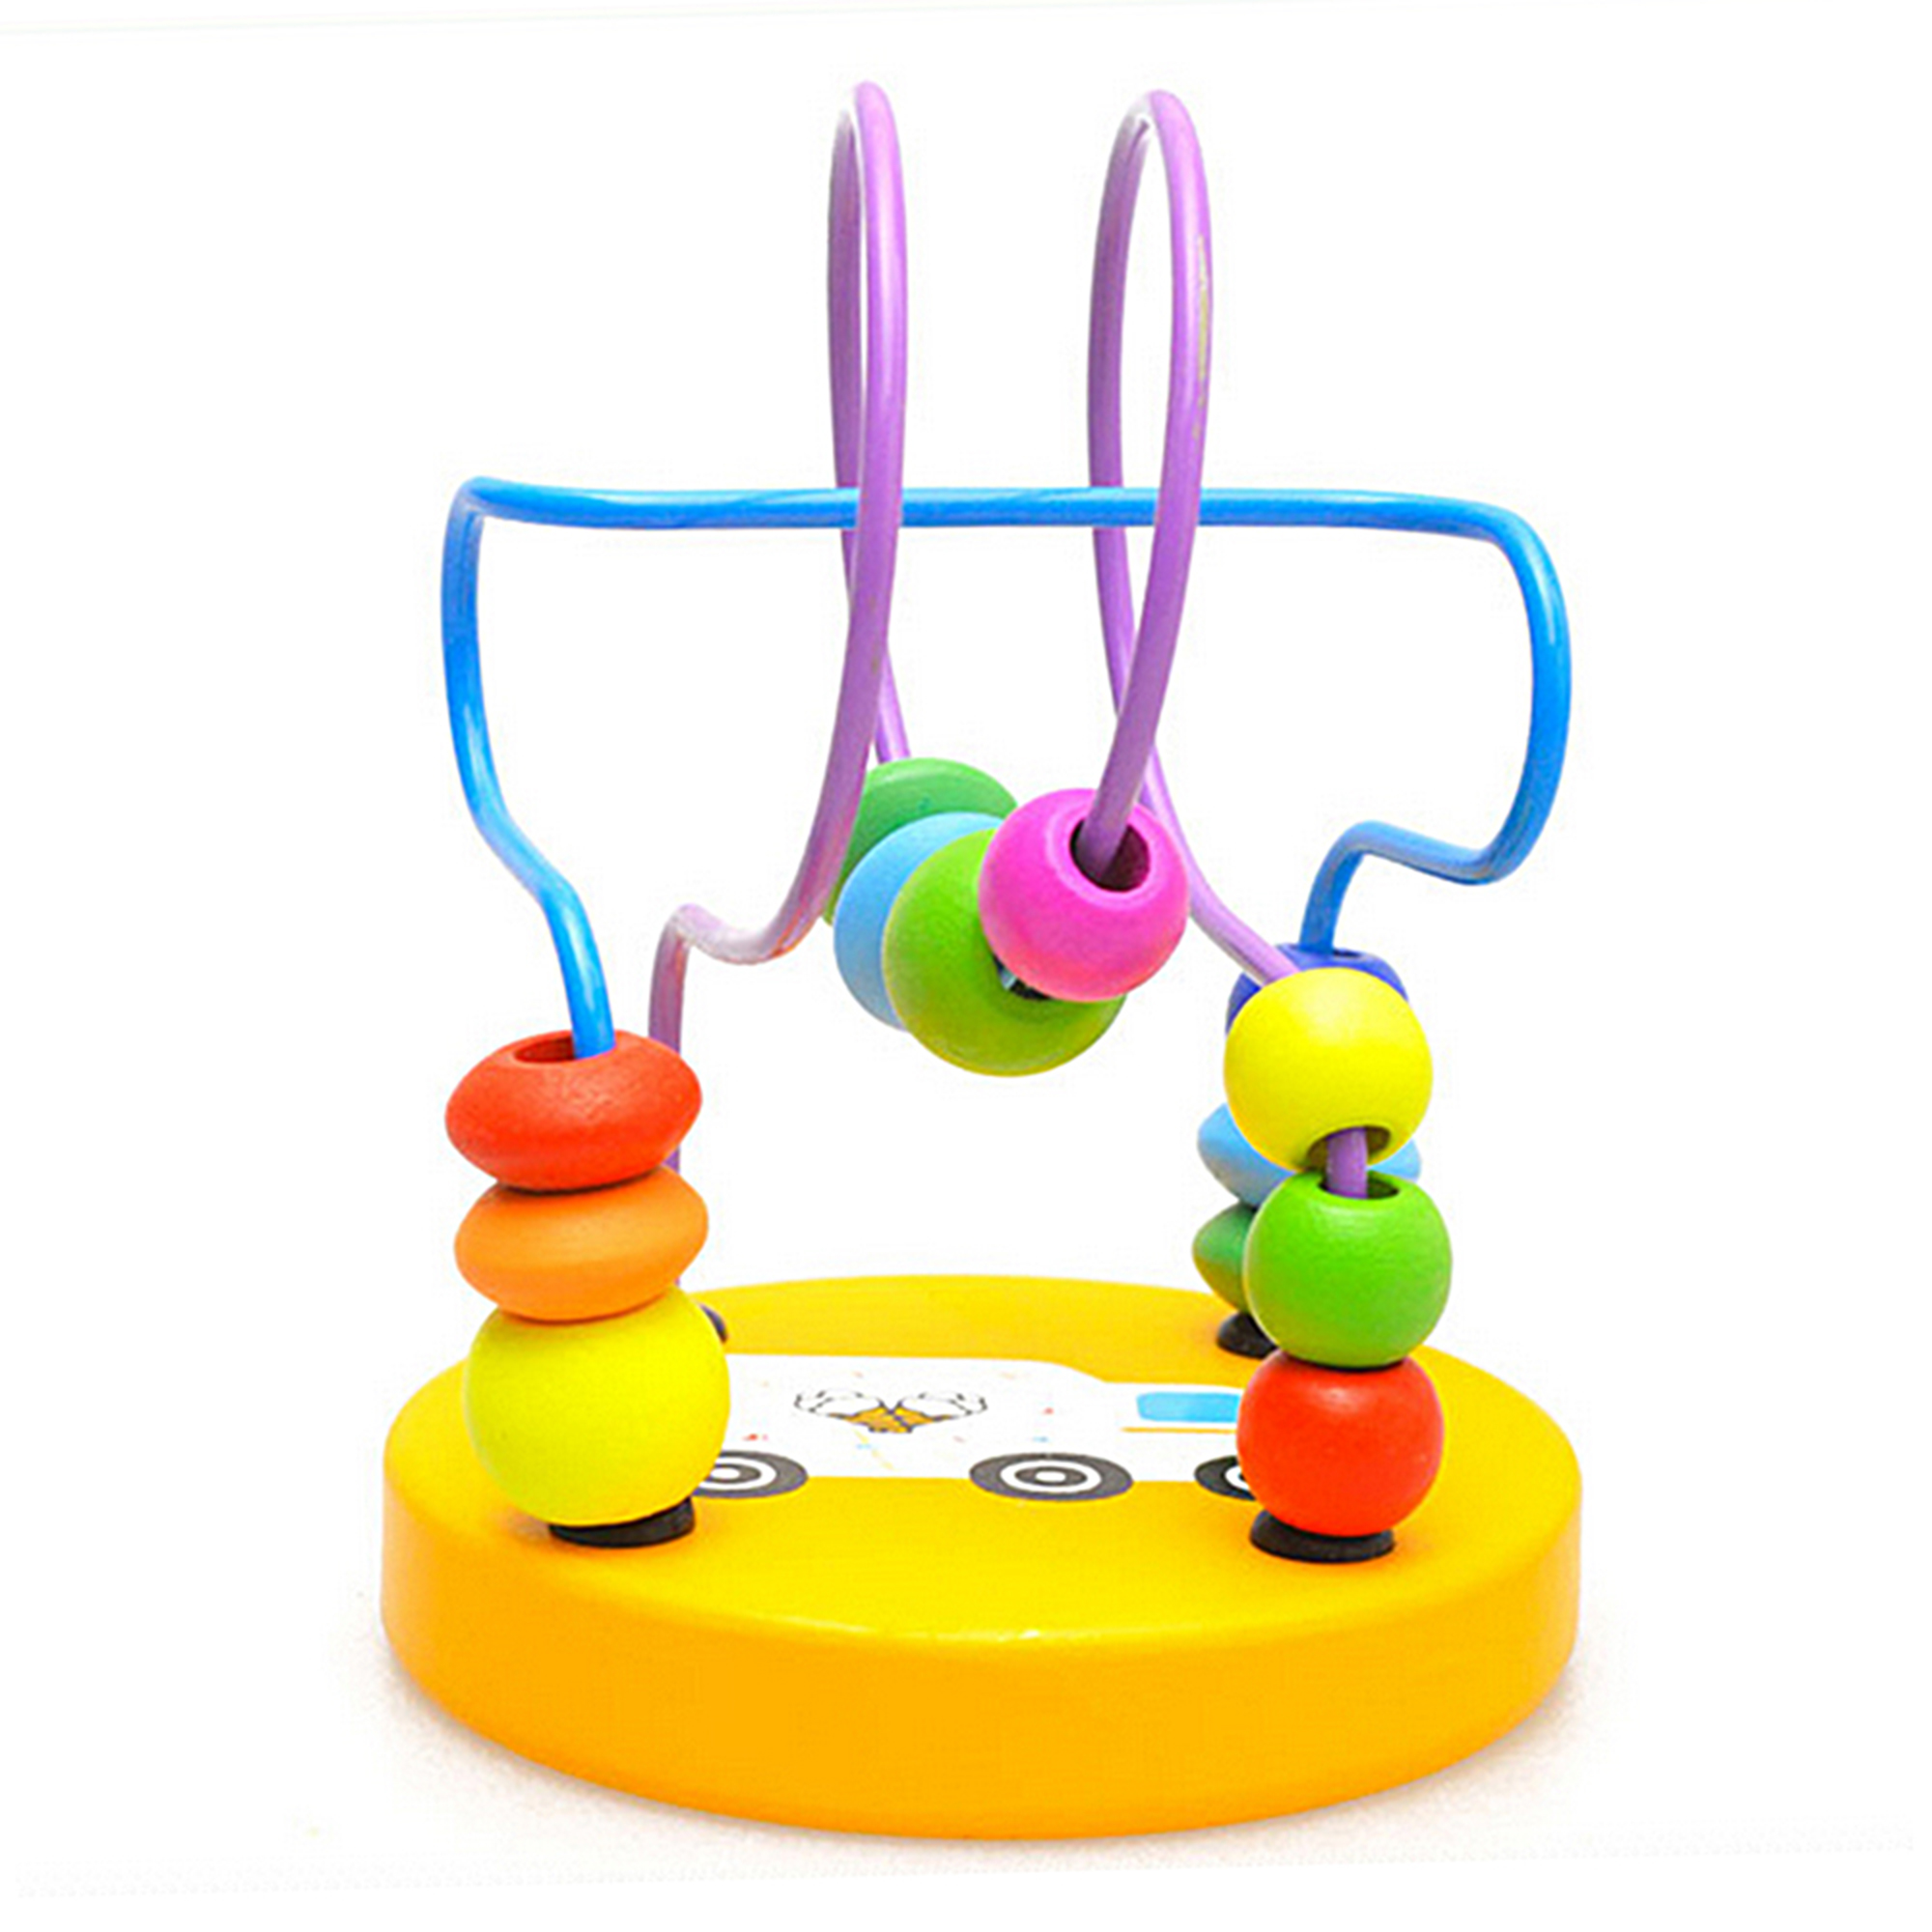 Wire Maze Roller Coaster for Toddlers Toy Gift Child Kids Colorful Wooden Mini Around Bead Educational Game Toy for Kids Sliding Beads On Twists Wire - image 4 of 6